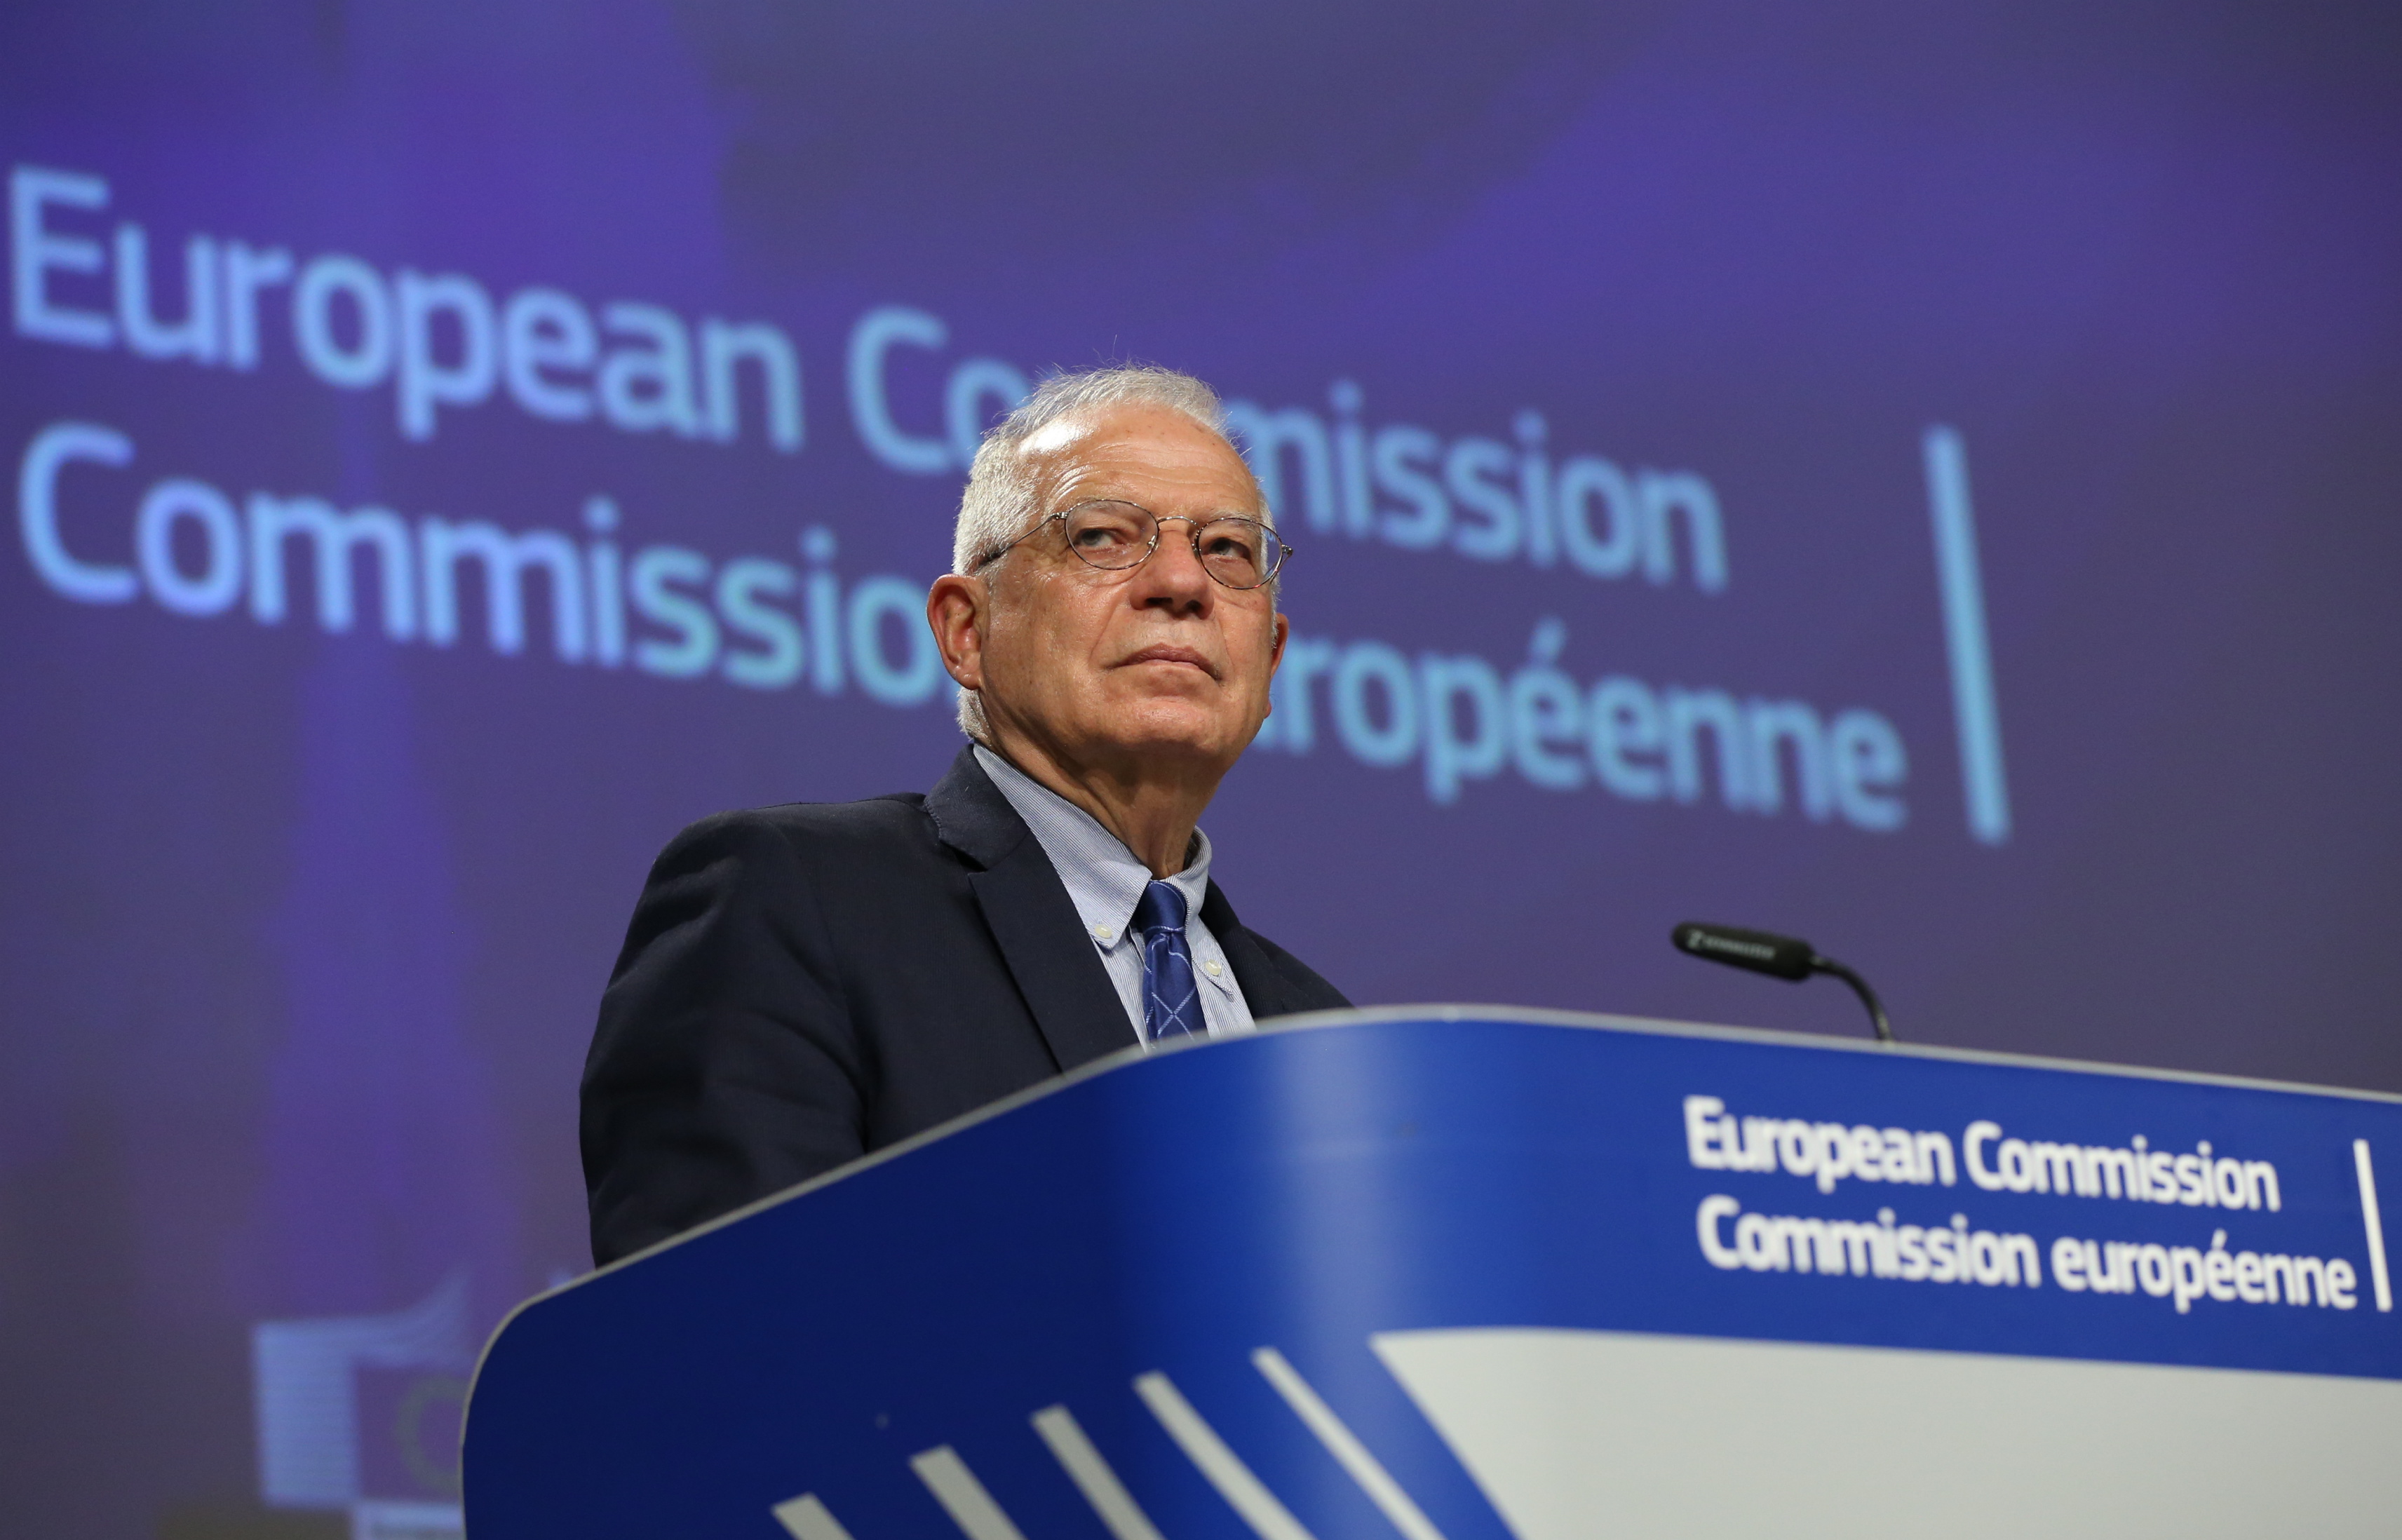 Josep Borrell, High Representative of the European Union, holds a press conference in Brussels, Belgium, on May 26.